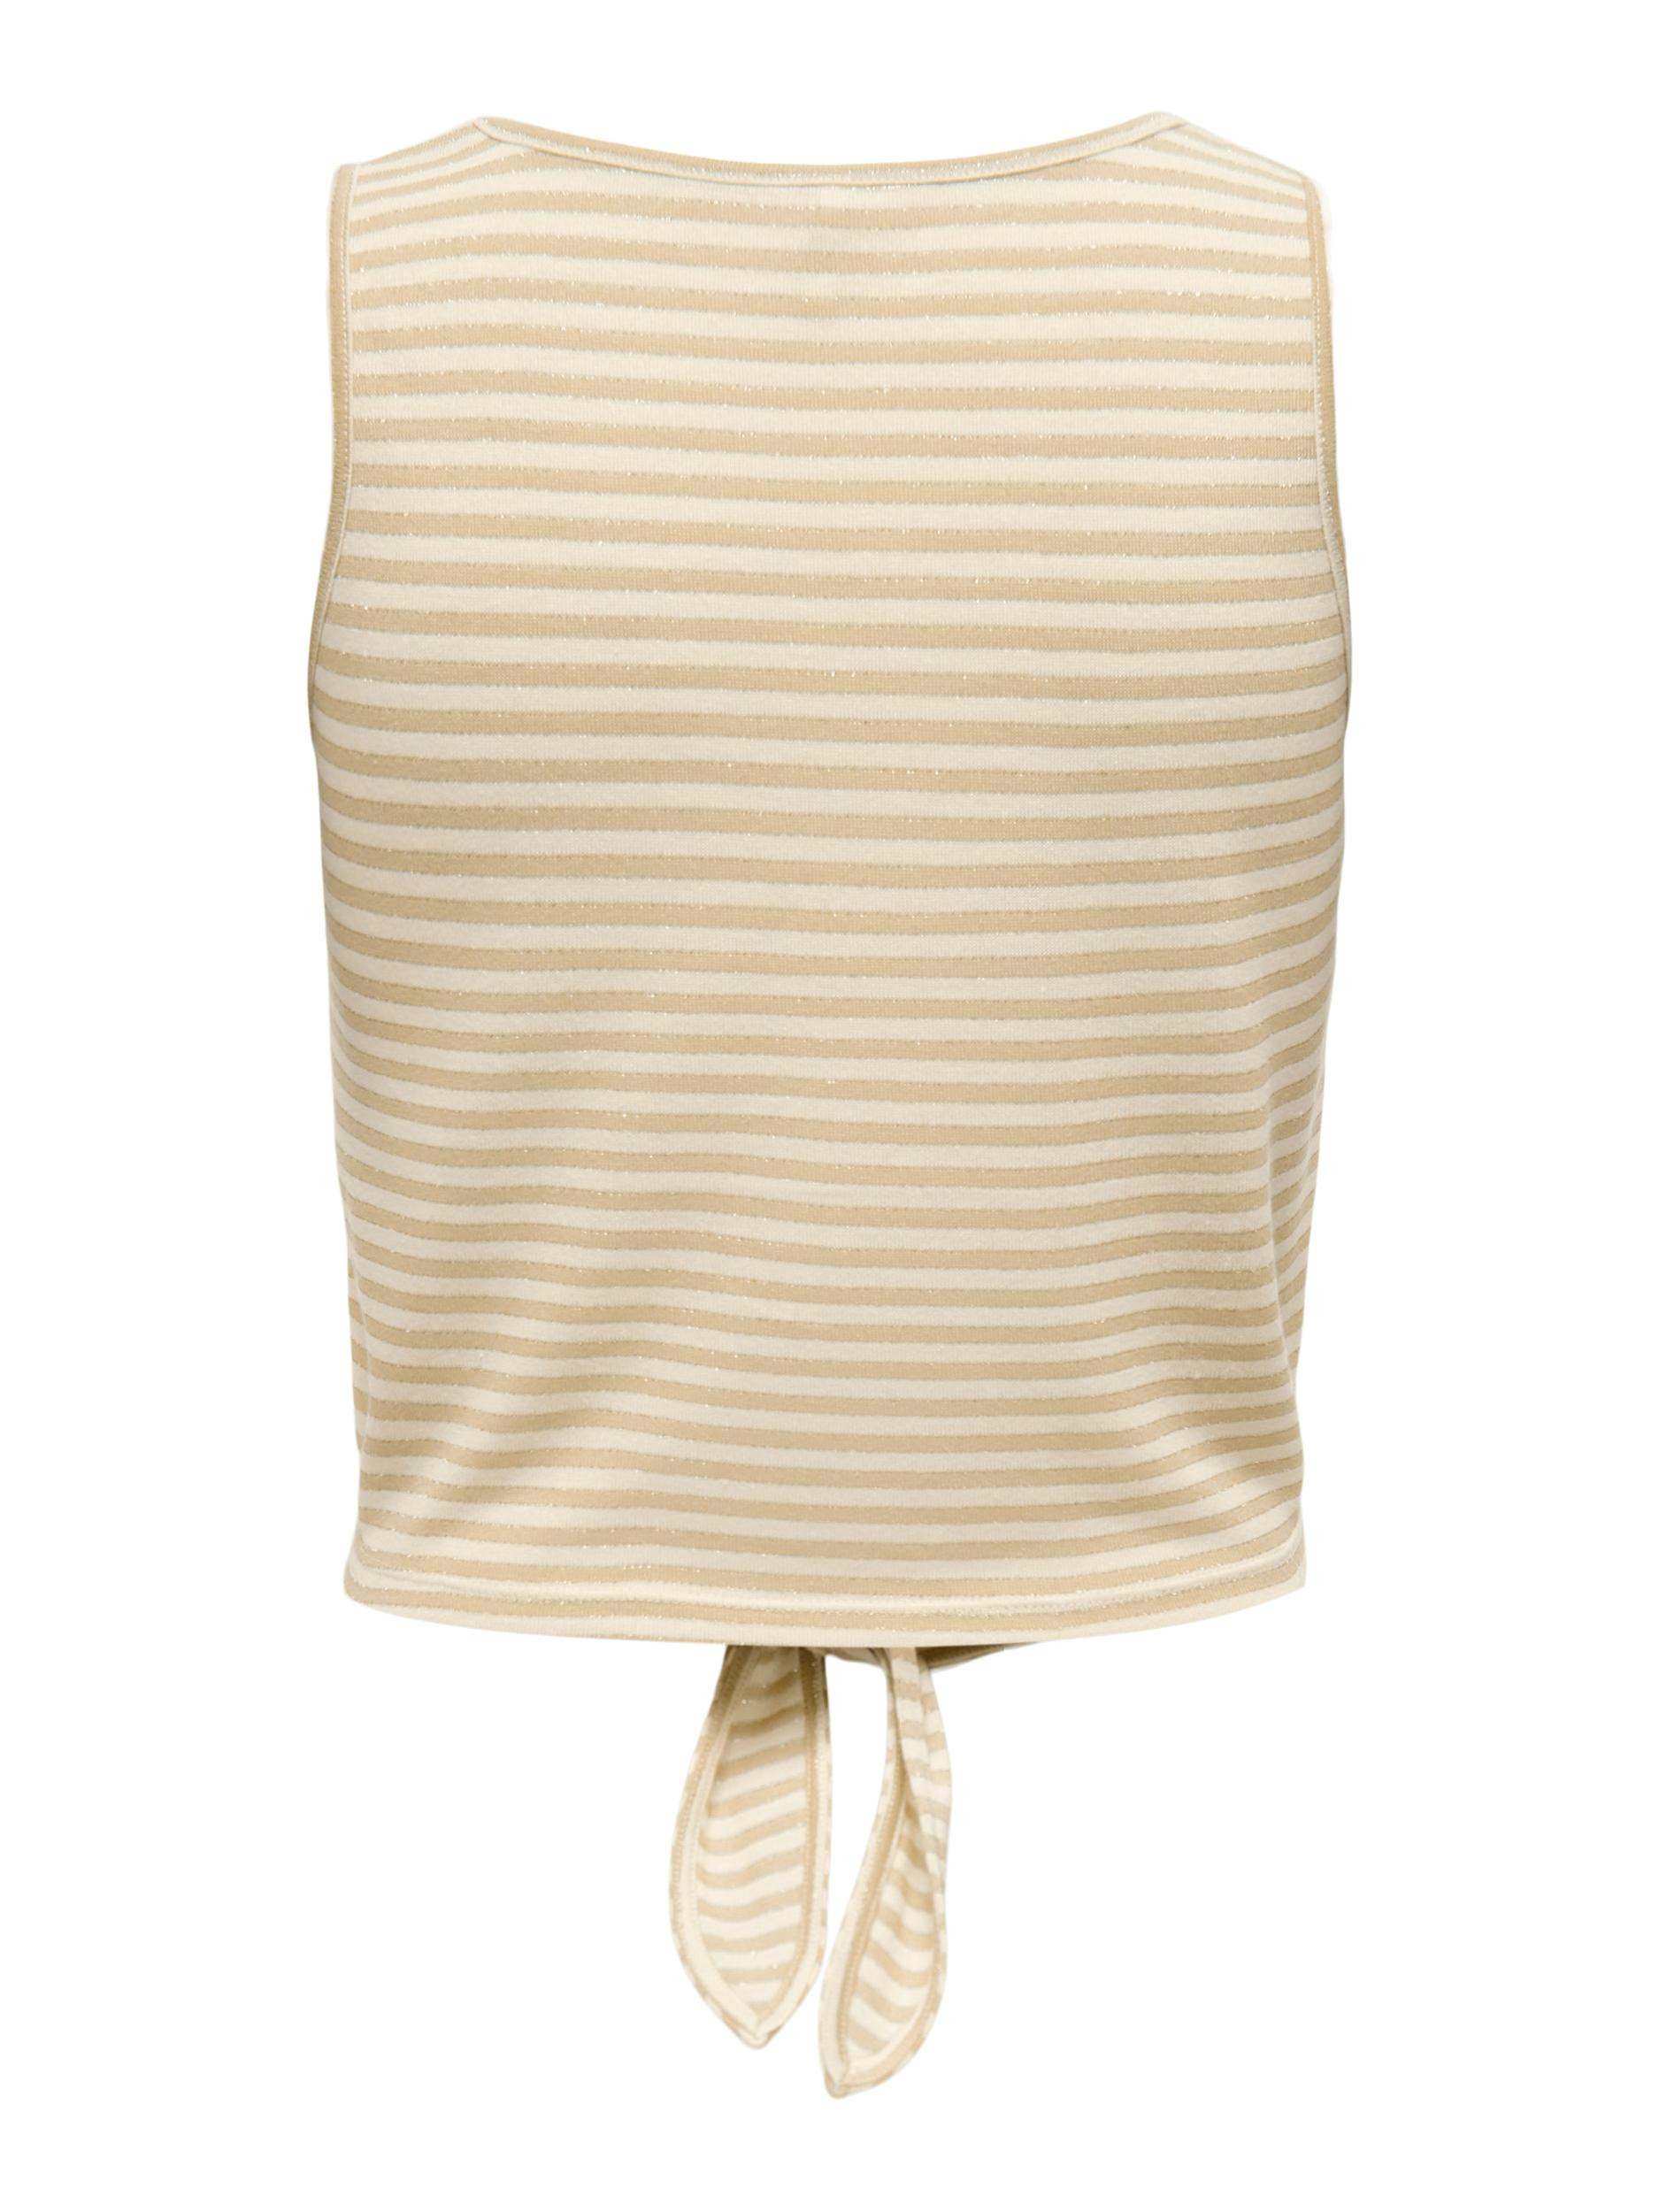 Only - Striped tank top, Cream, large image number 1